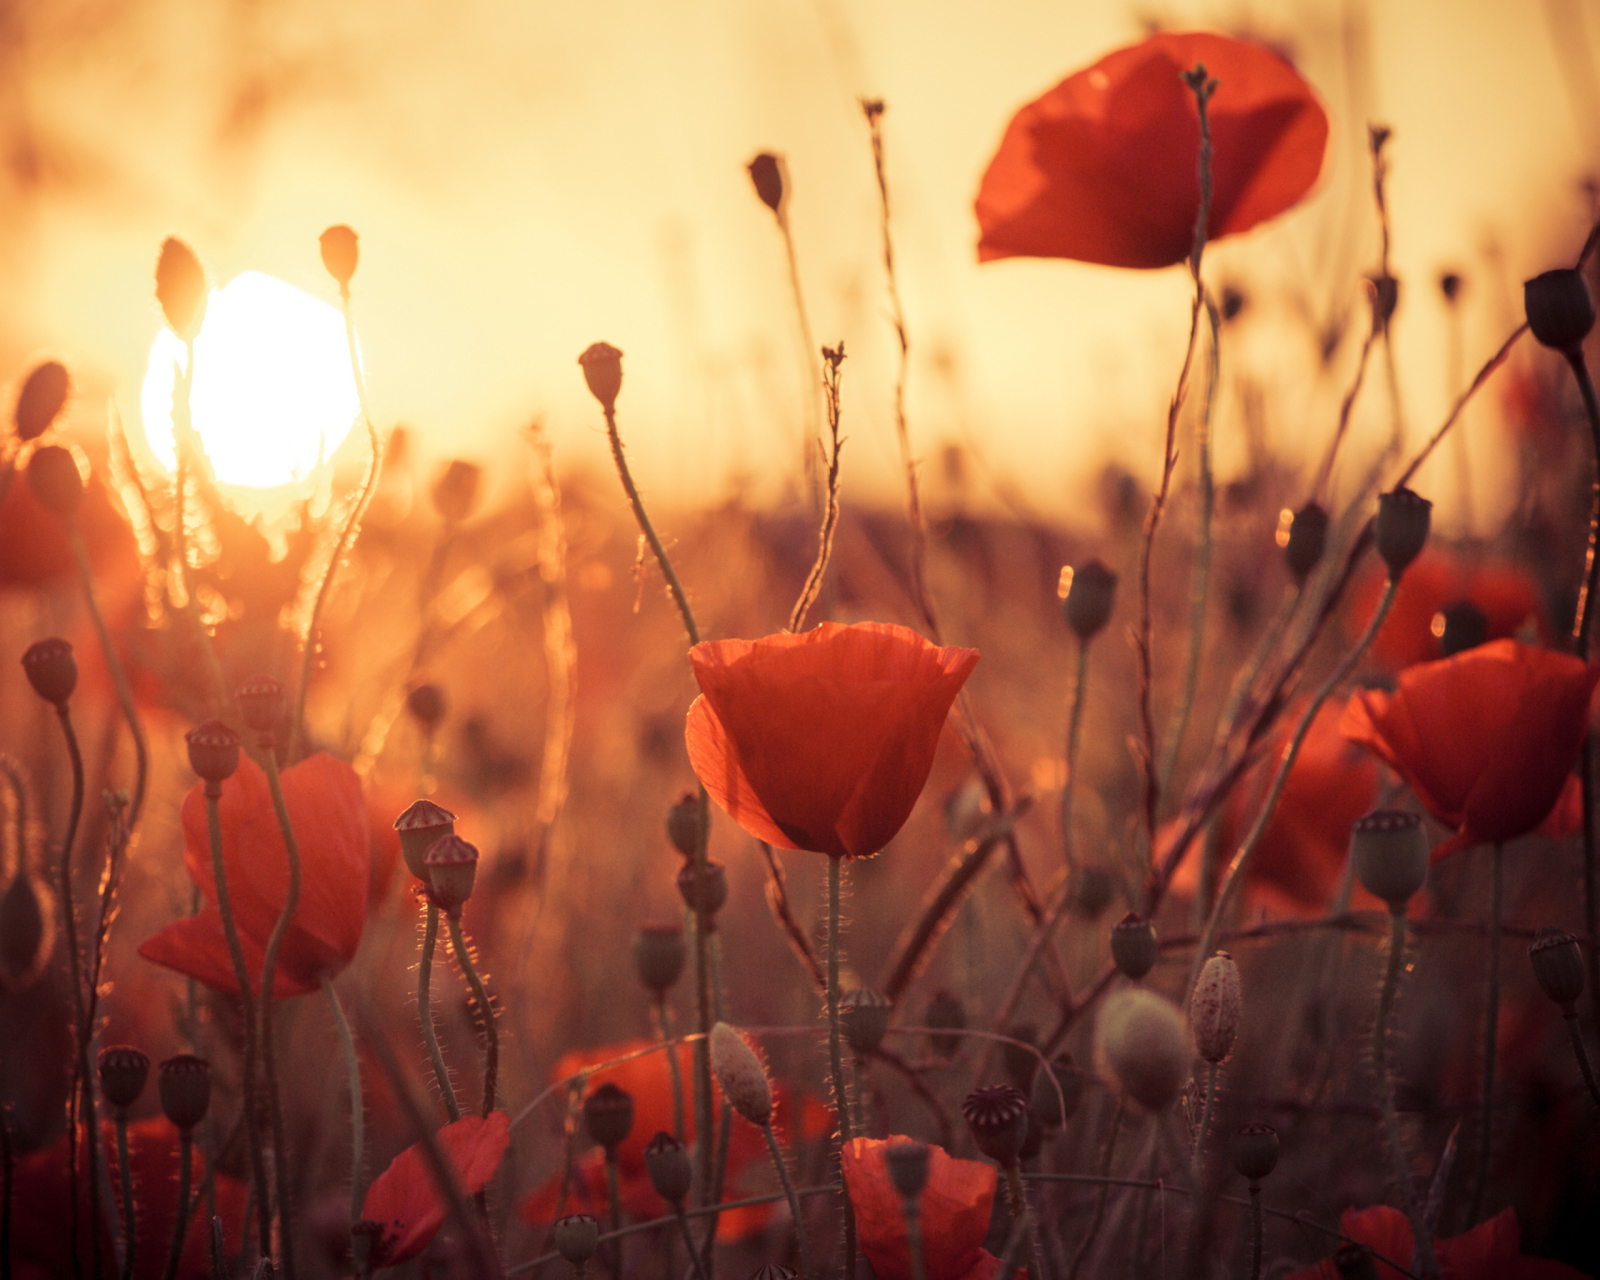 Poppies At Sunset wallpaper 1600x1280